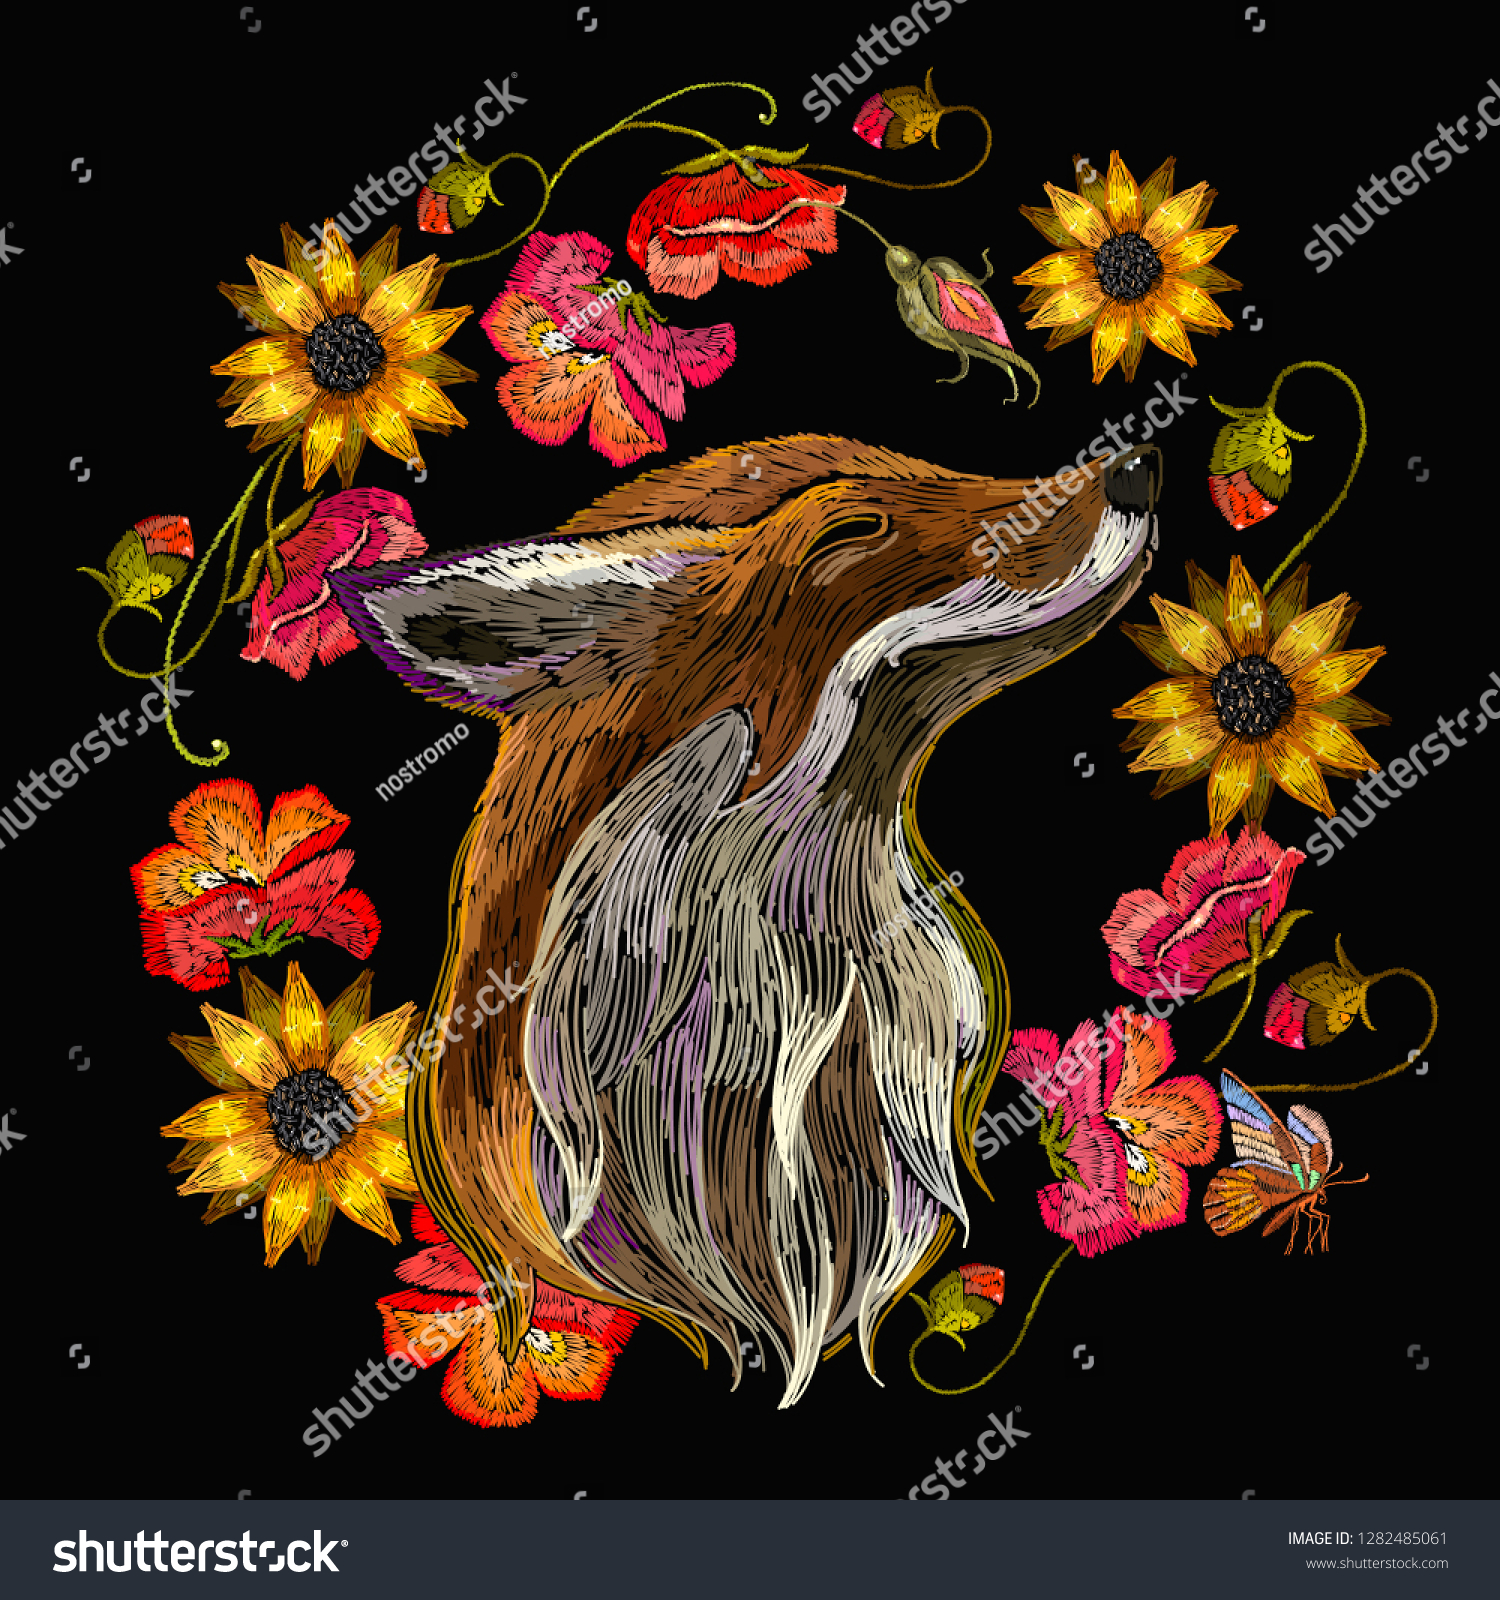 Asymmetric cotton art decorated t-shirt Foxes in flowers Cotton Jumper Hand painted for women